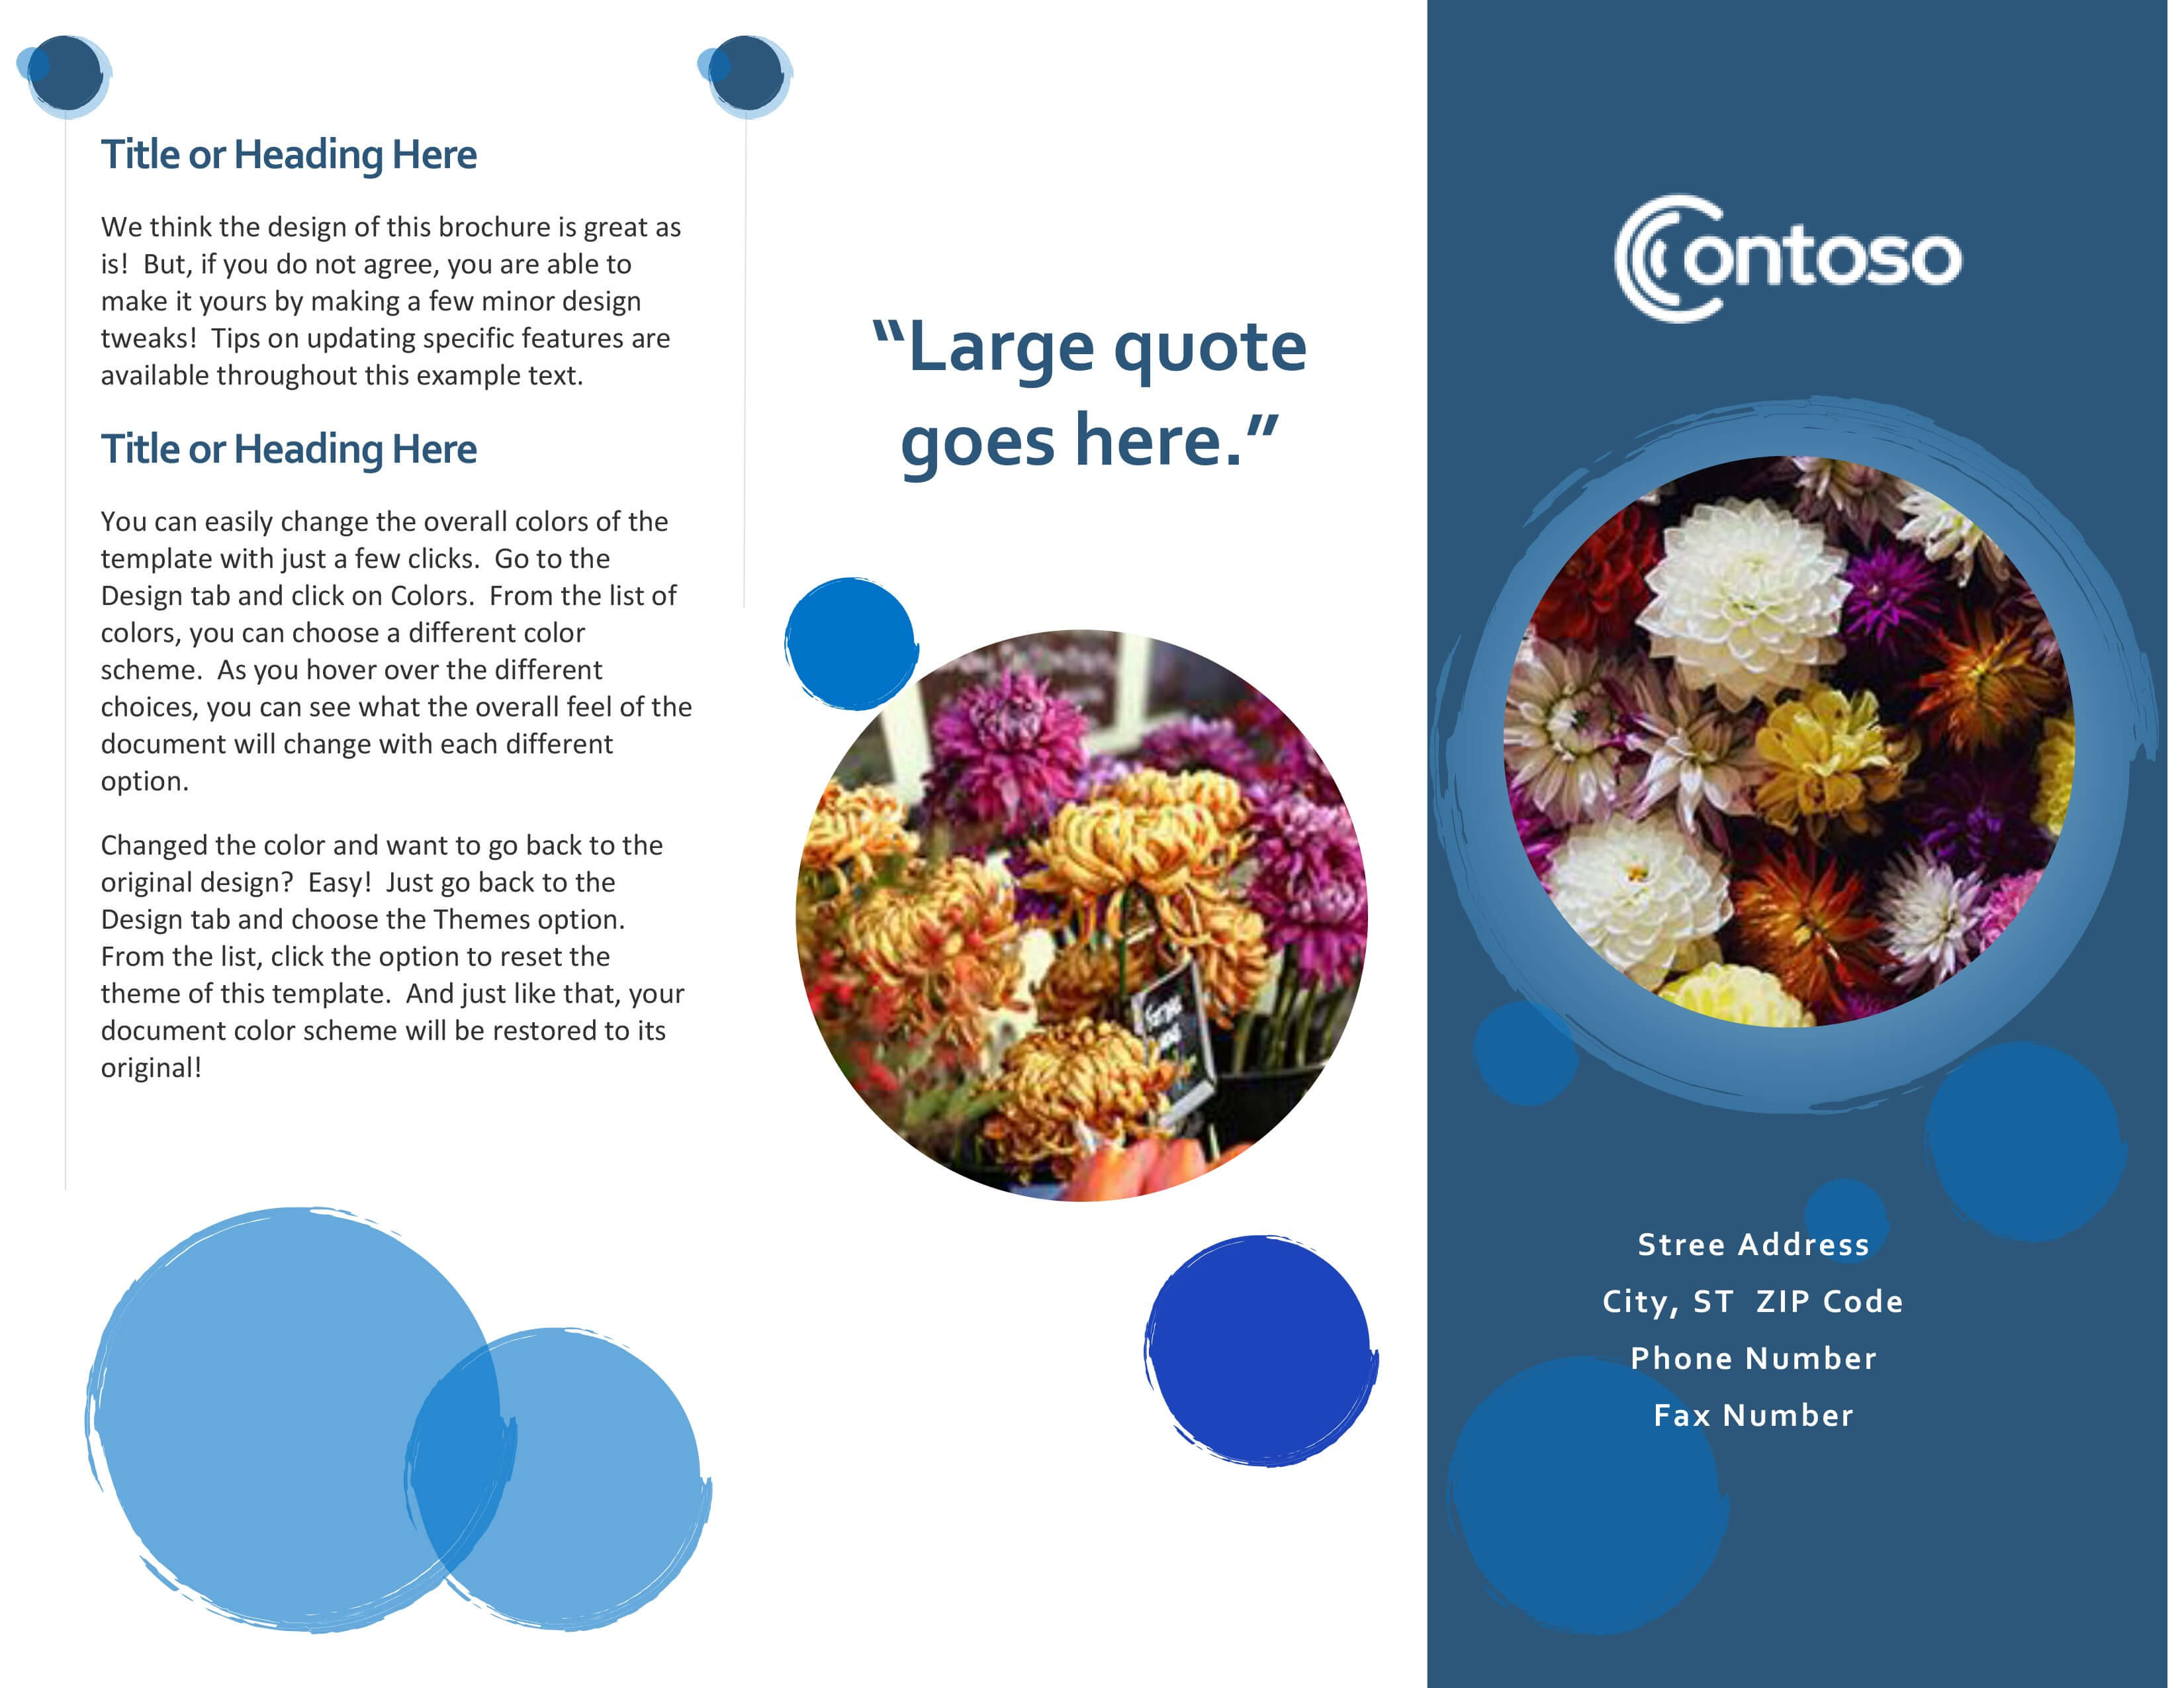 Free Template For Brochure Microsoft Office Regarding Free Template For Brochure Microsoft Office